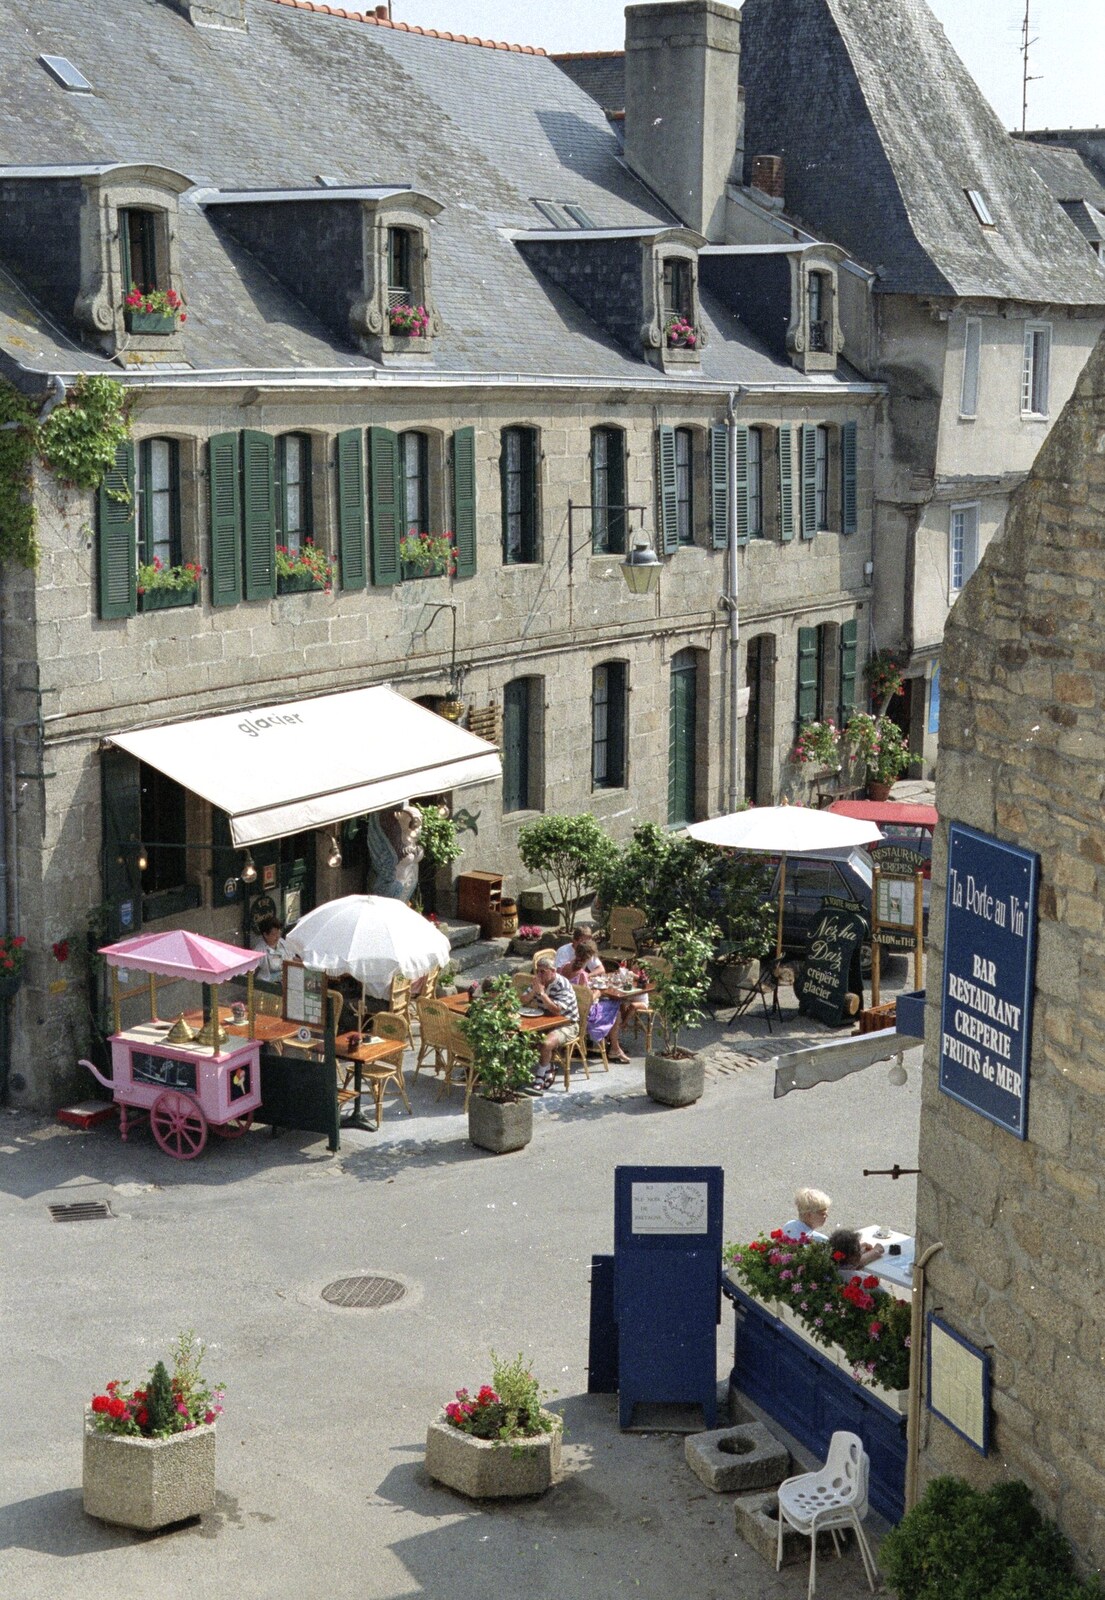 A Trip To Huelgoat, Brittany, France - 11th June 1990: Scene by the Porte au Vin restaurant